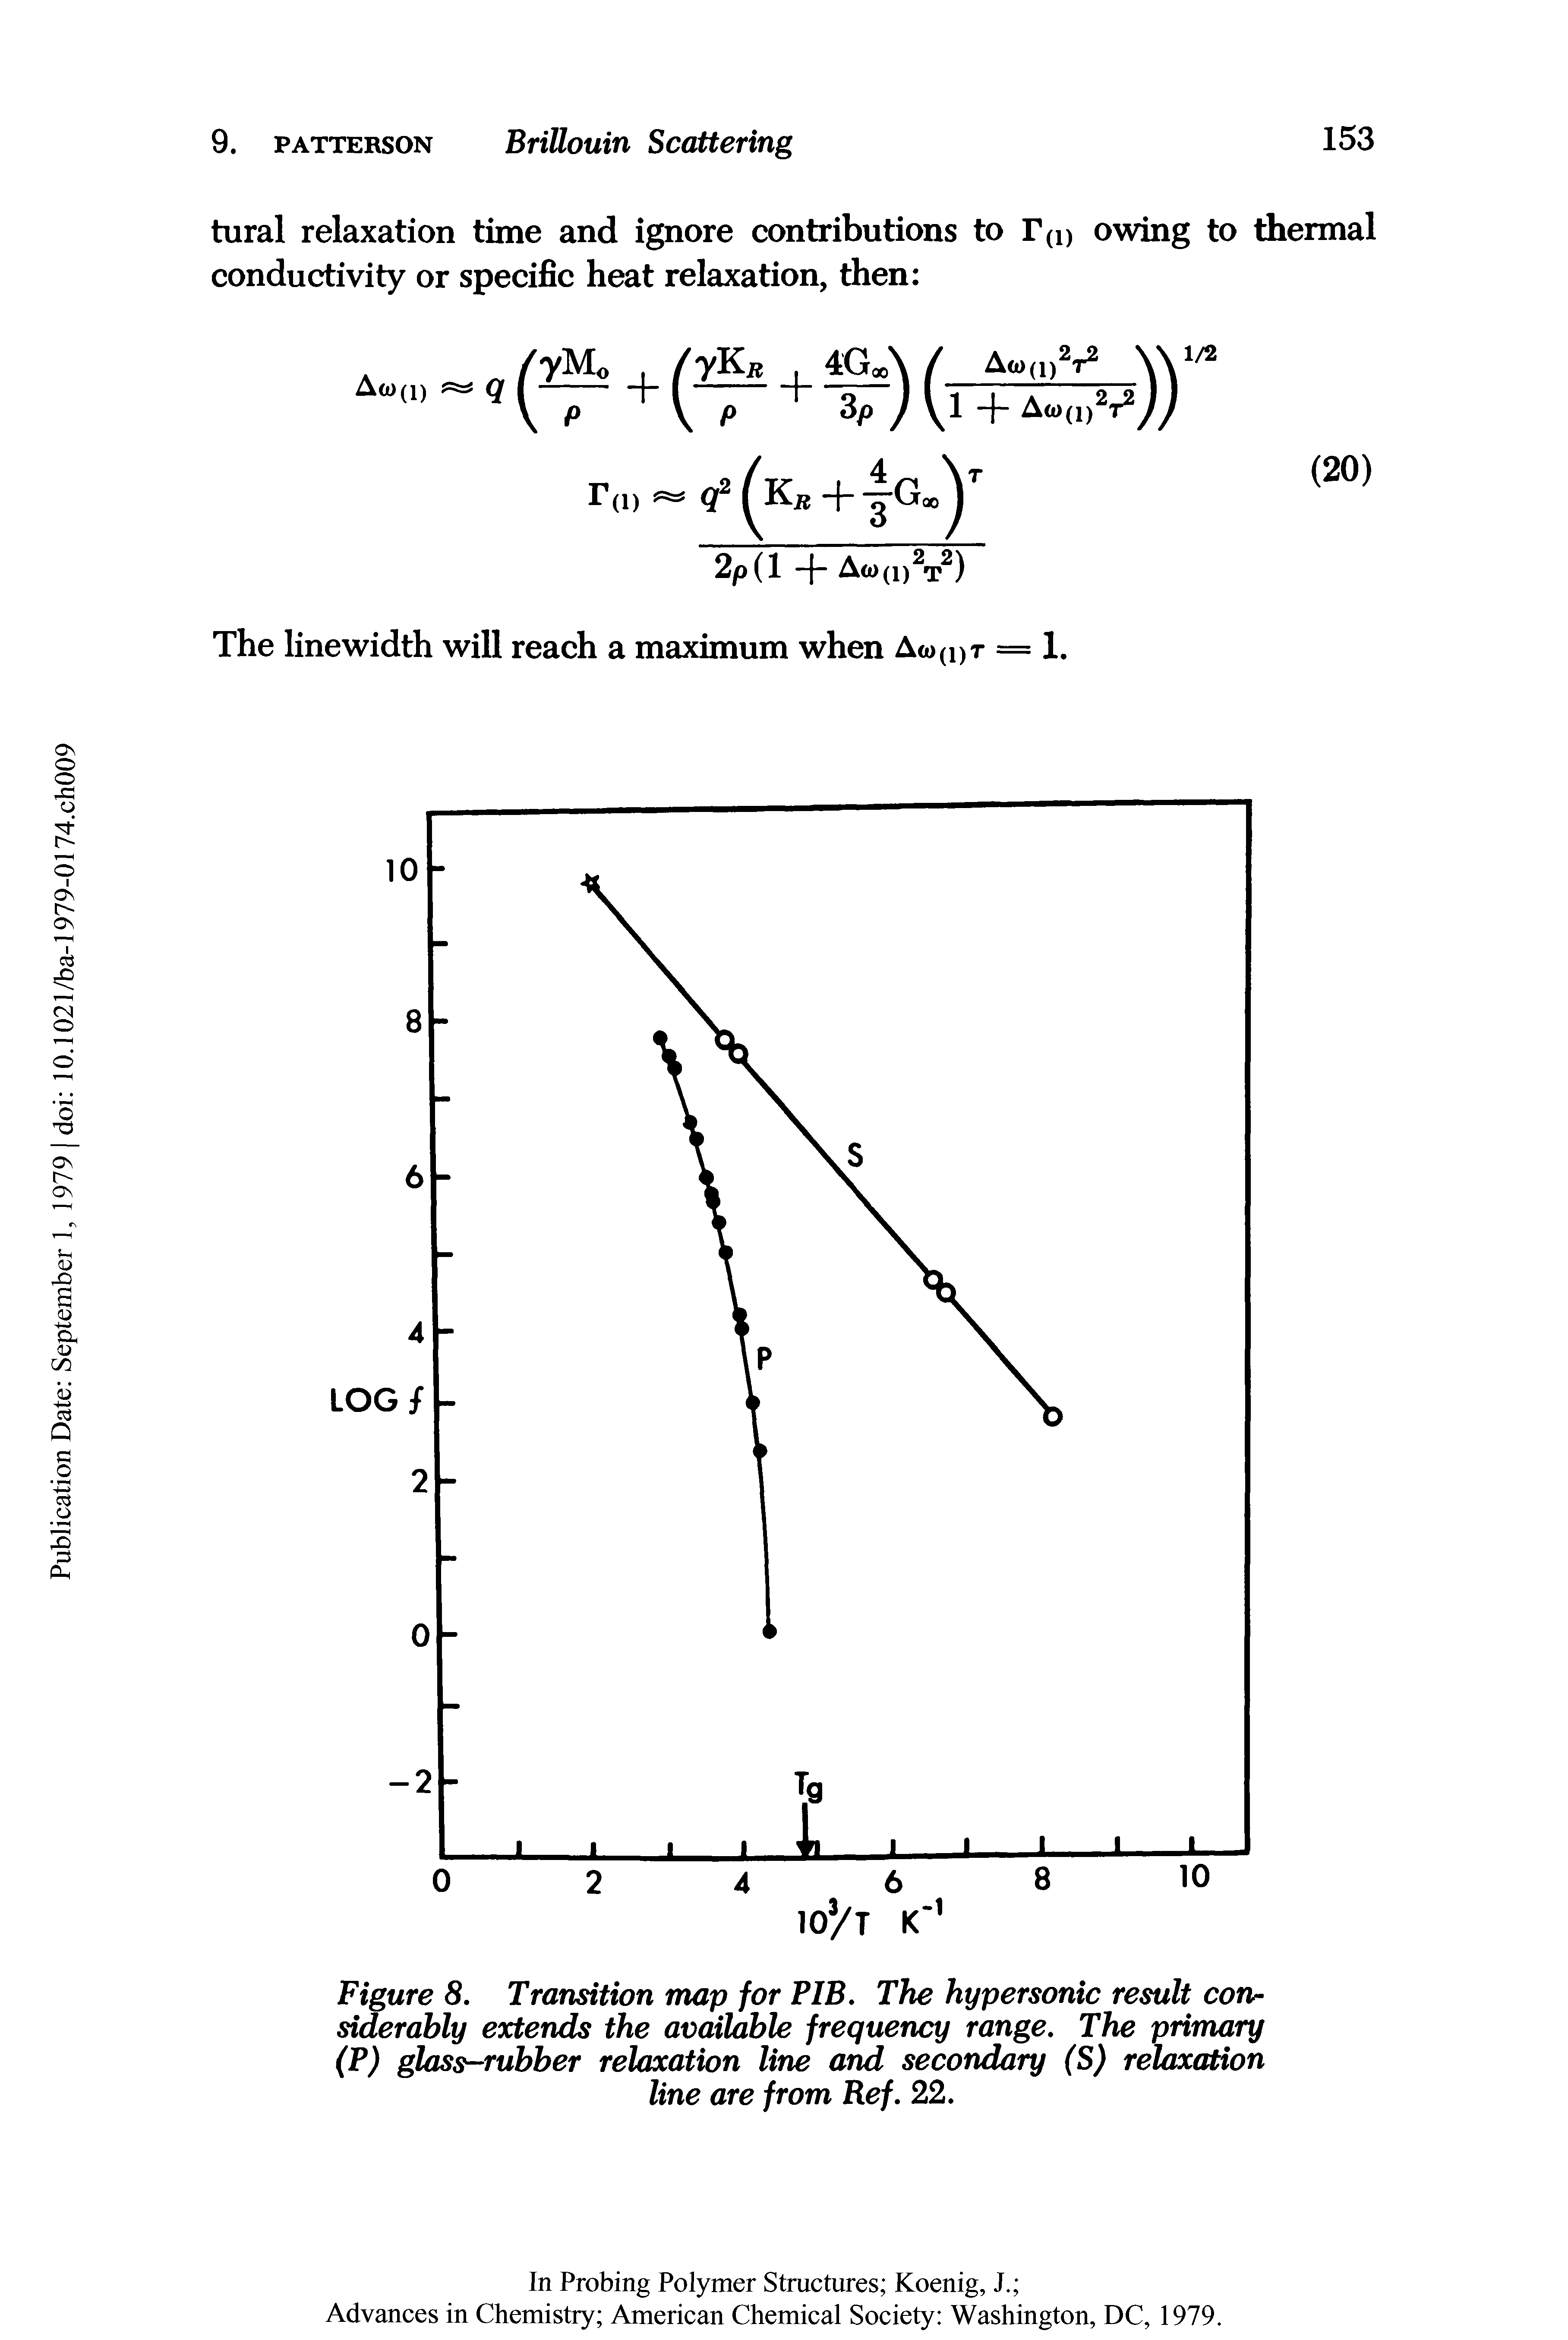 Figure 8, Transition map for PIB. The hypersonic result corir siderahly extends the available frequency range. The primary (P) glass-rubber relaxation line and secondary (S) relaxation line are from Ref. 22.